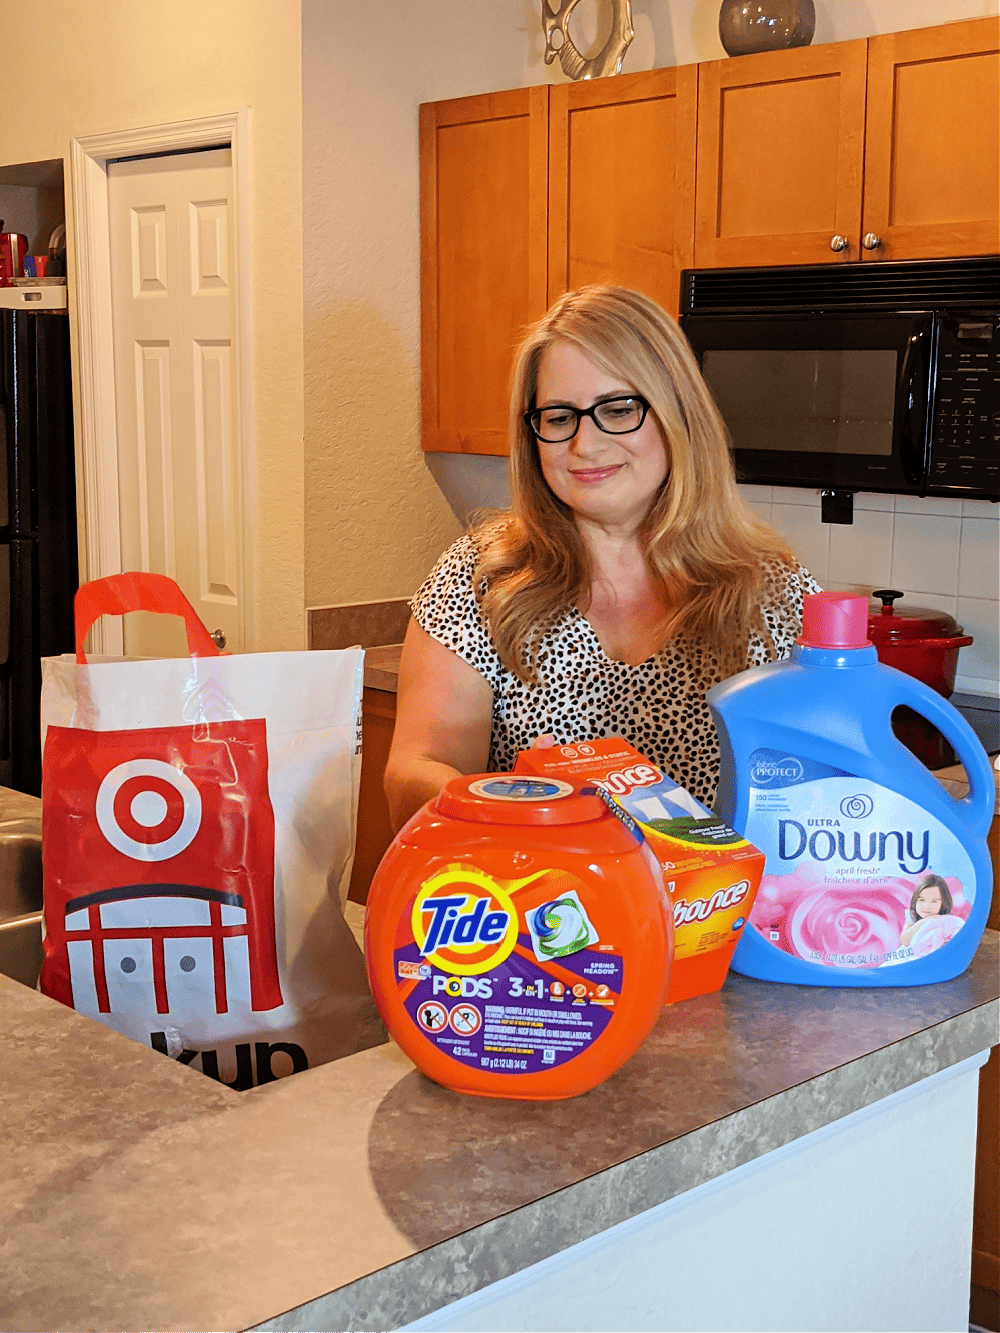 Laundry is a fact of life, especially when you have a busy family. I do try to look at the bright side of things, especially with everything 2020 has thrown at us. Saving money on my favorite laundry and fabric care brands at Target definitely makes the chore of doing laundry a lot brighter.